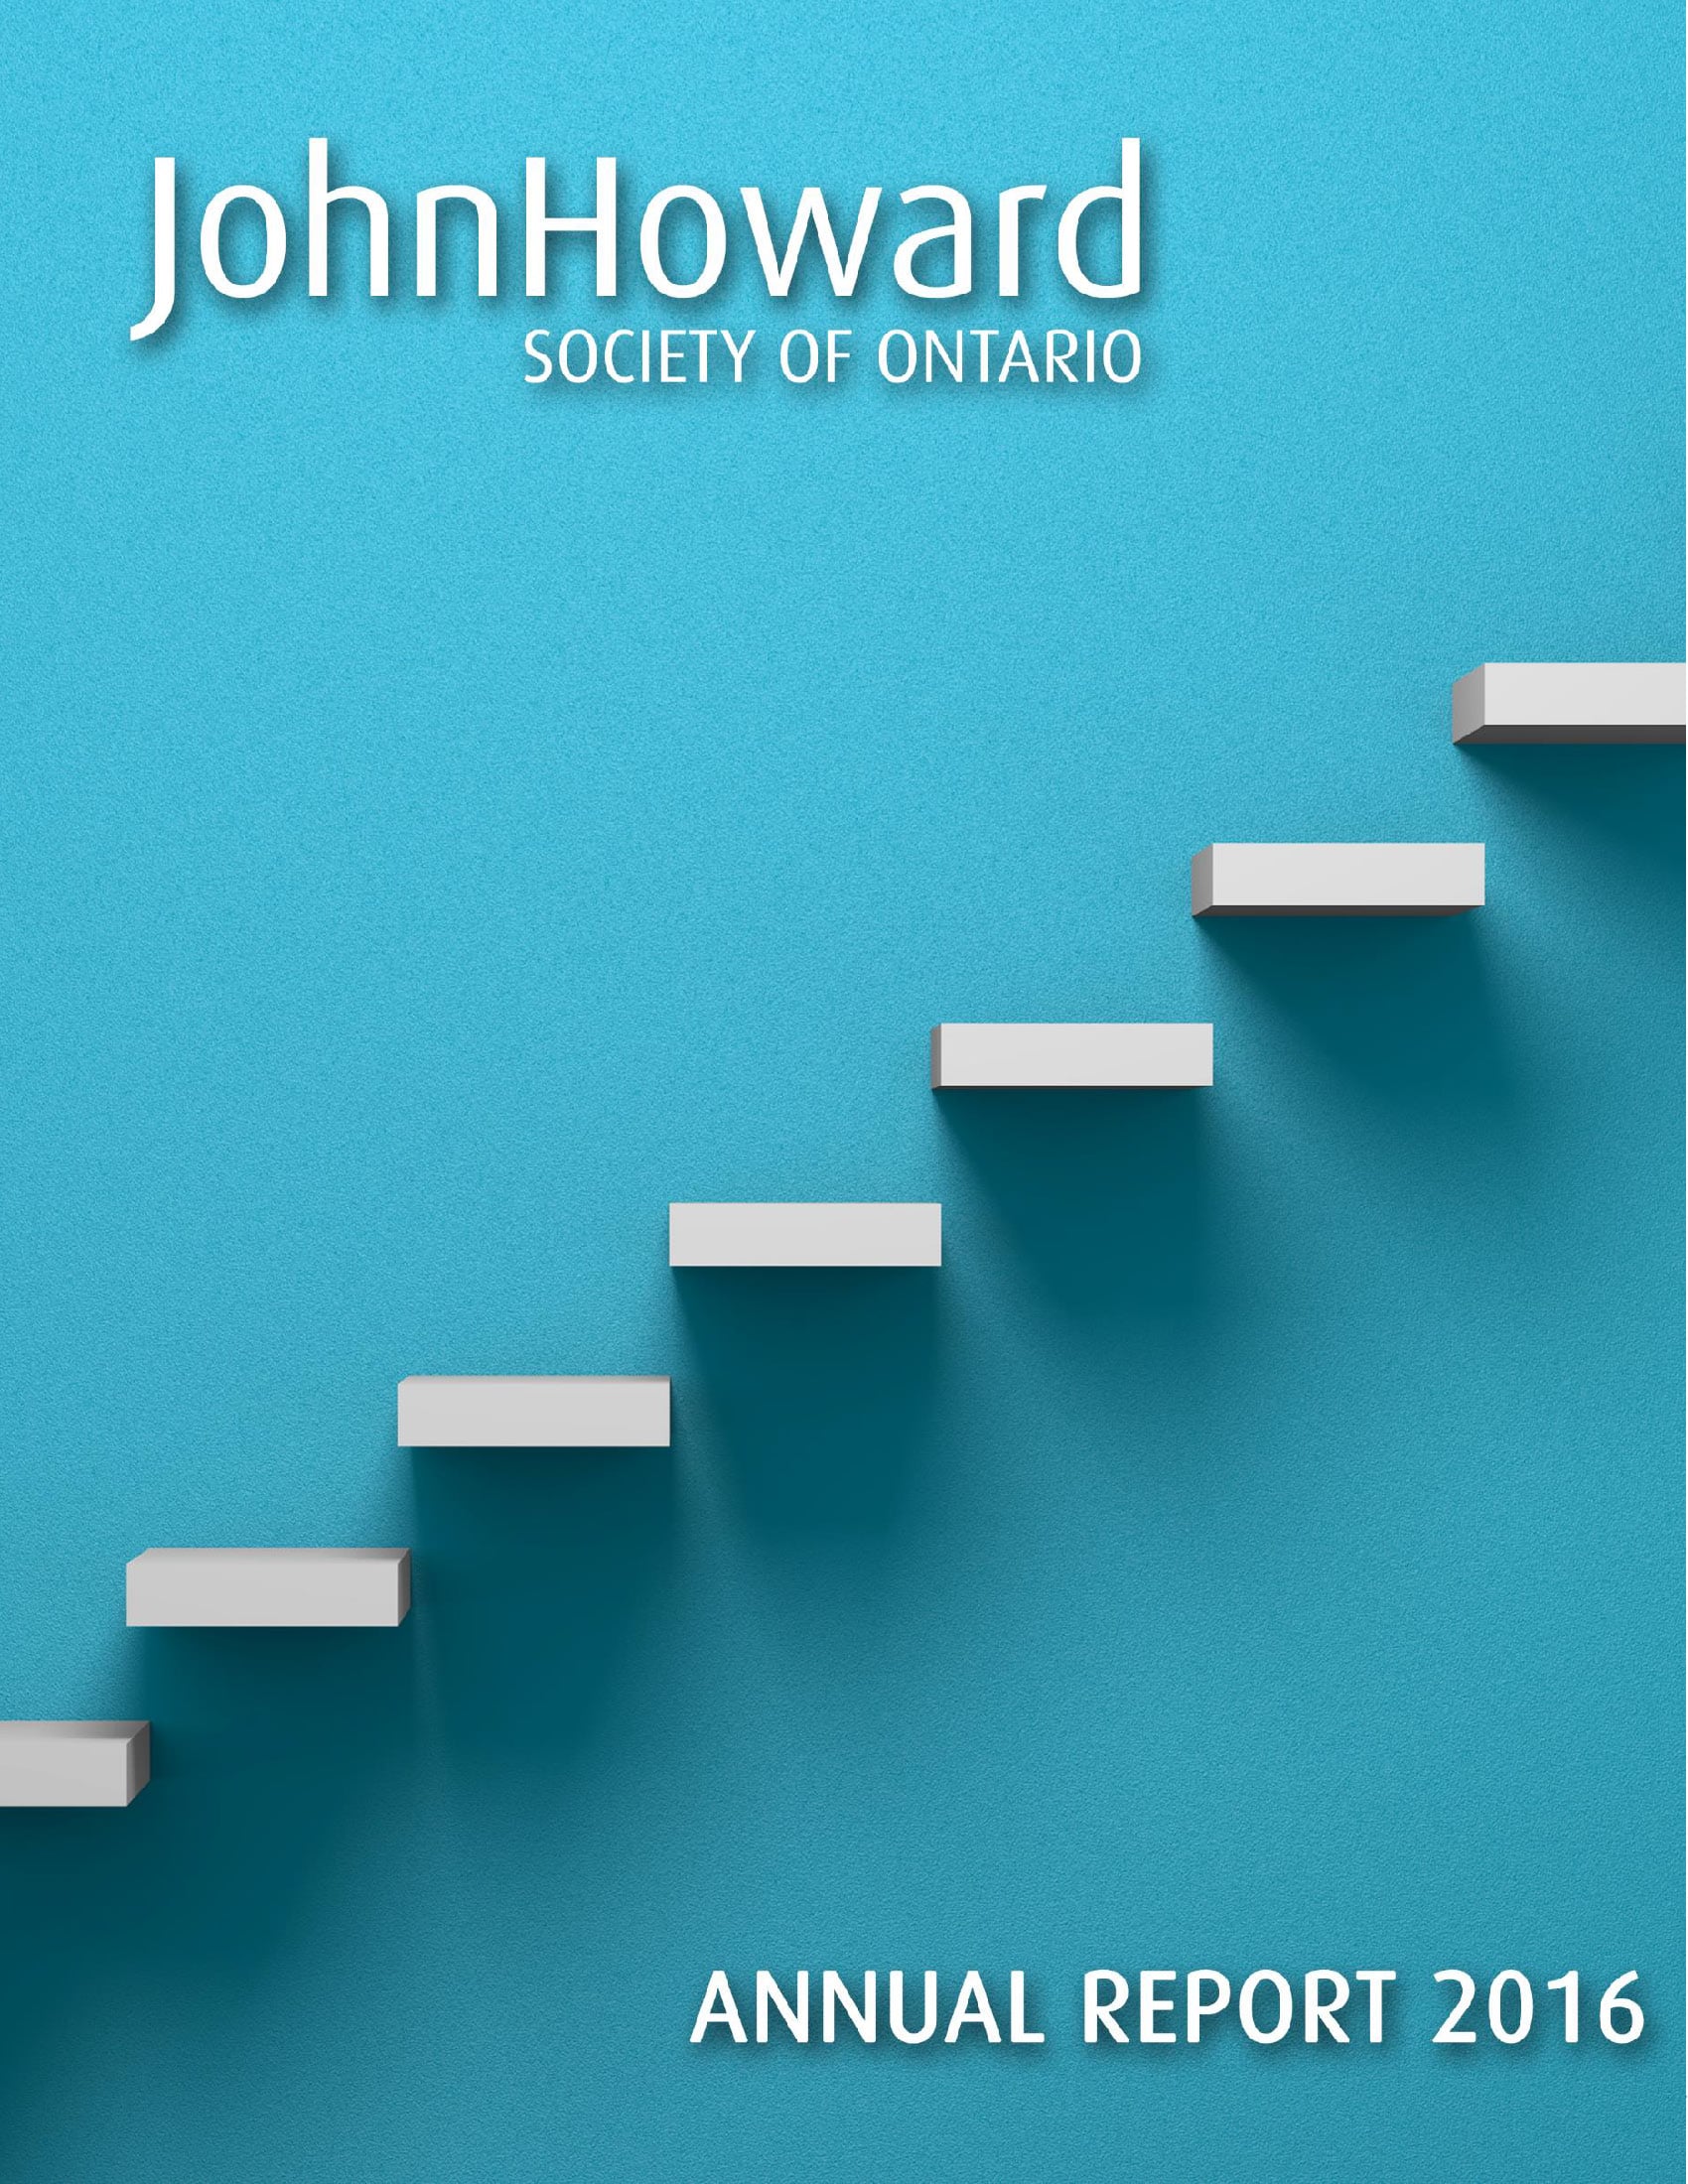 Cover of JHSO annual report 2016 with white steps going up